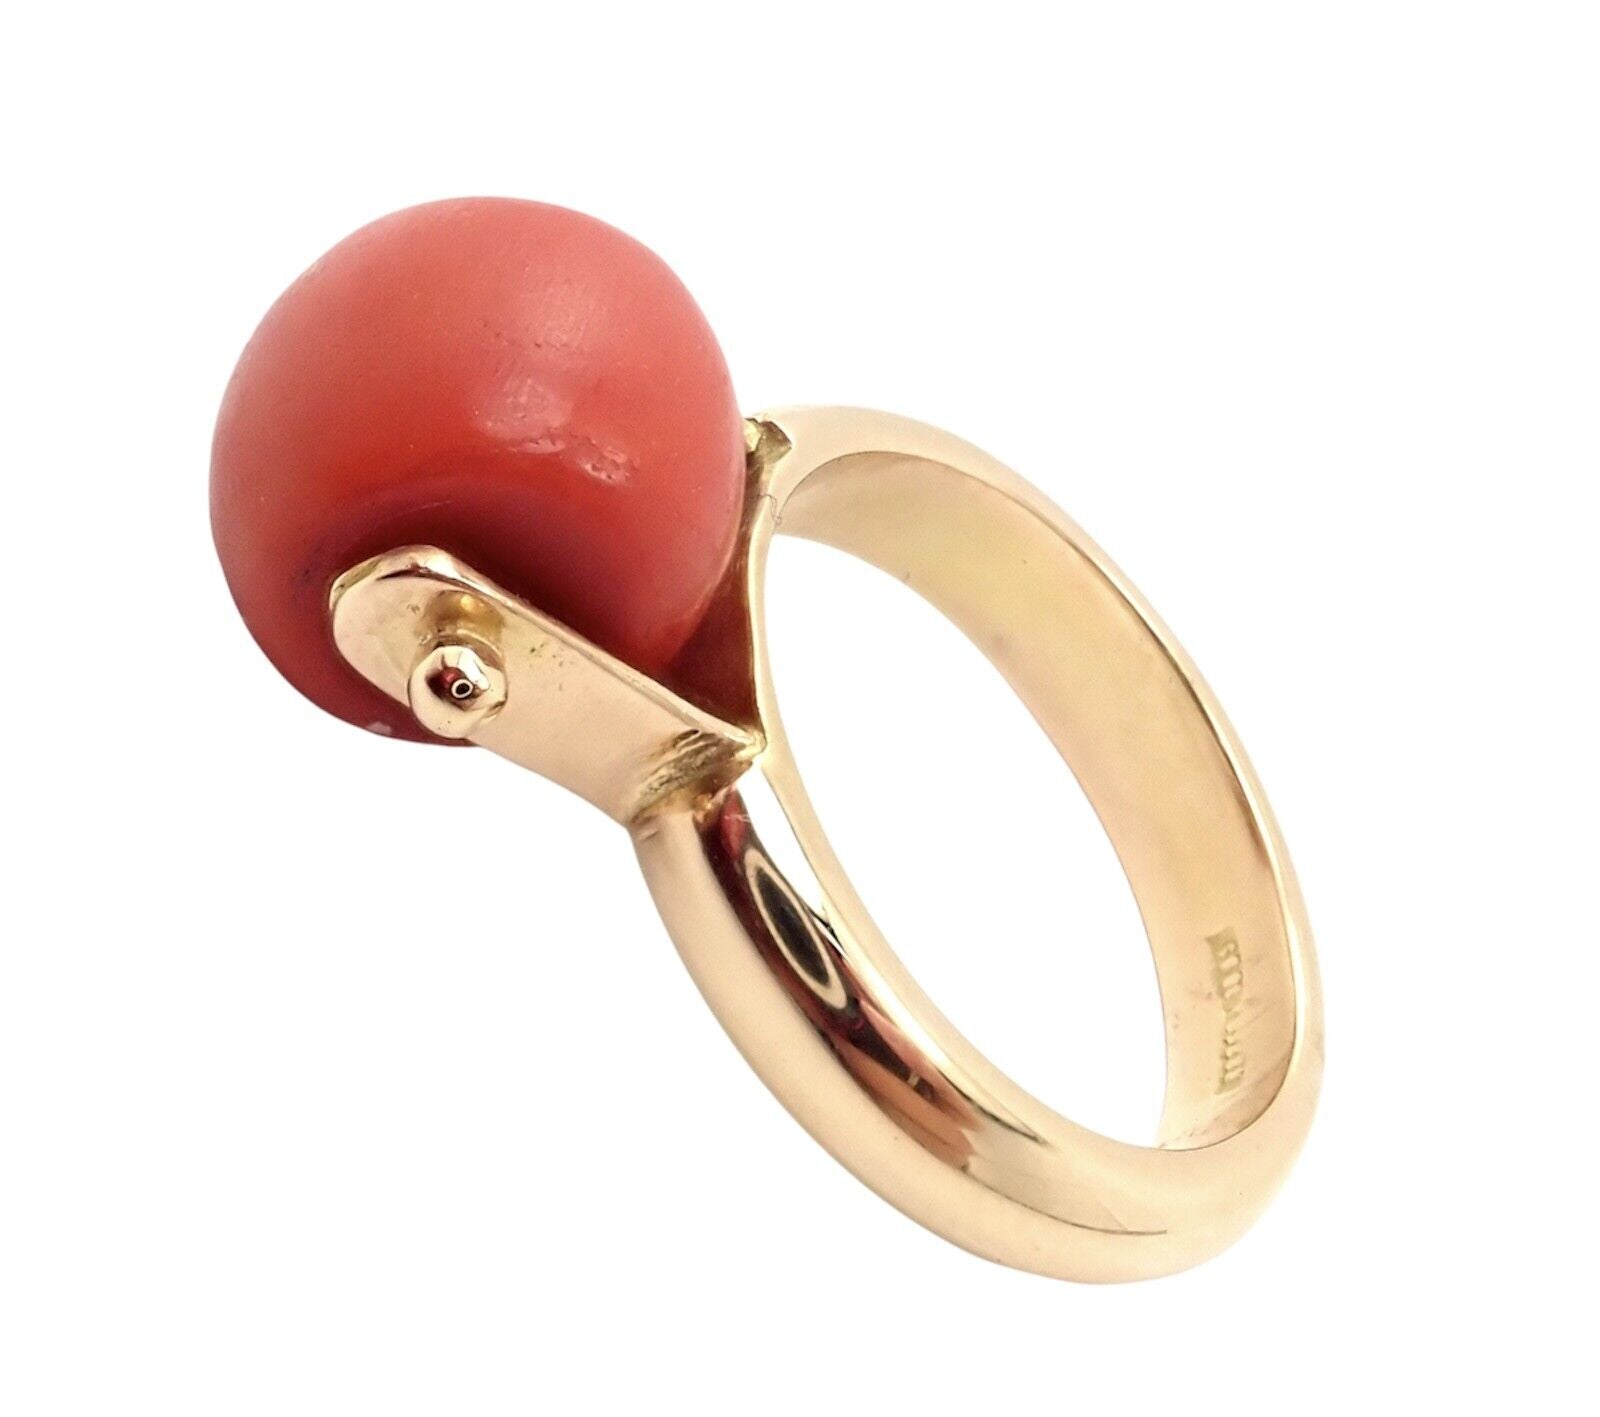 Buy Coral Red Gold Ring Ortica Handmade Vintage Jewelry Made in Italy  Statement Mediterranean Victorian Art Deco Art Nouveau Renaissance Online  in India - Etsy